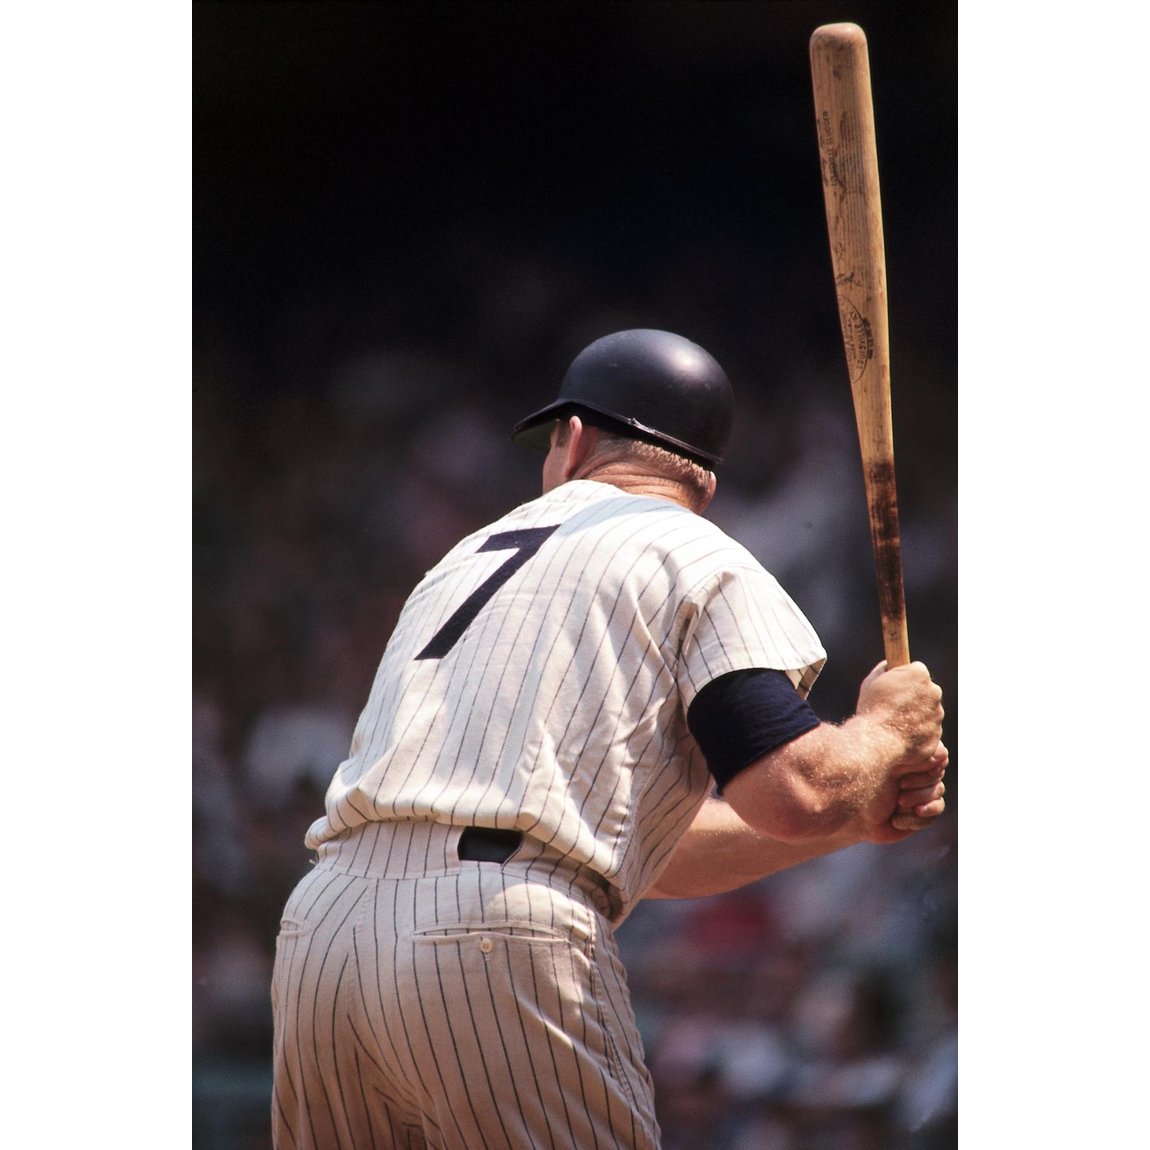 New York Yankees switch-hitter Mickey Mantle bats from both sides of the plate during a game against the Kansas City Athletics at Yankee Stadium. July 1, 1964. #NeilLeifer #Photography #Baseball #AtBat #MickeyMantle #Yankees #NewYork